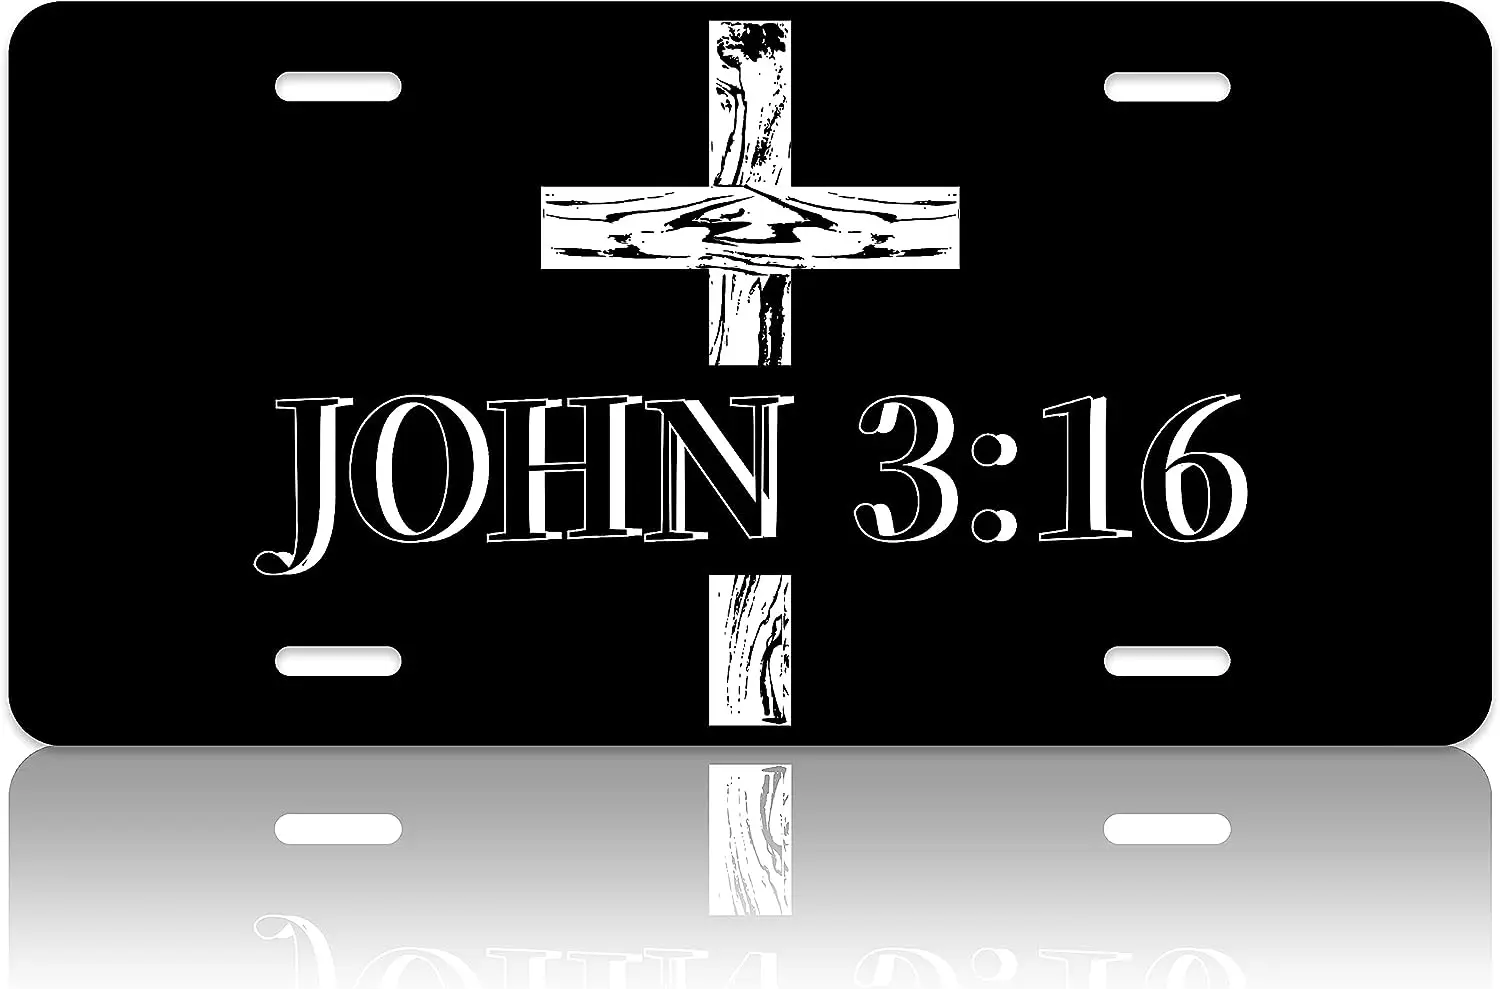 

John 3:16 Jesus Cross License Plate Religious License Plate Cover Car Front Rust-Proof Stainless Metal Car Plates Tag 12x6in